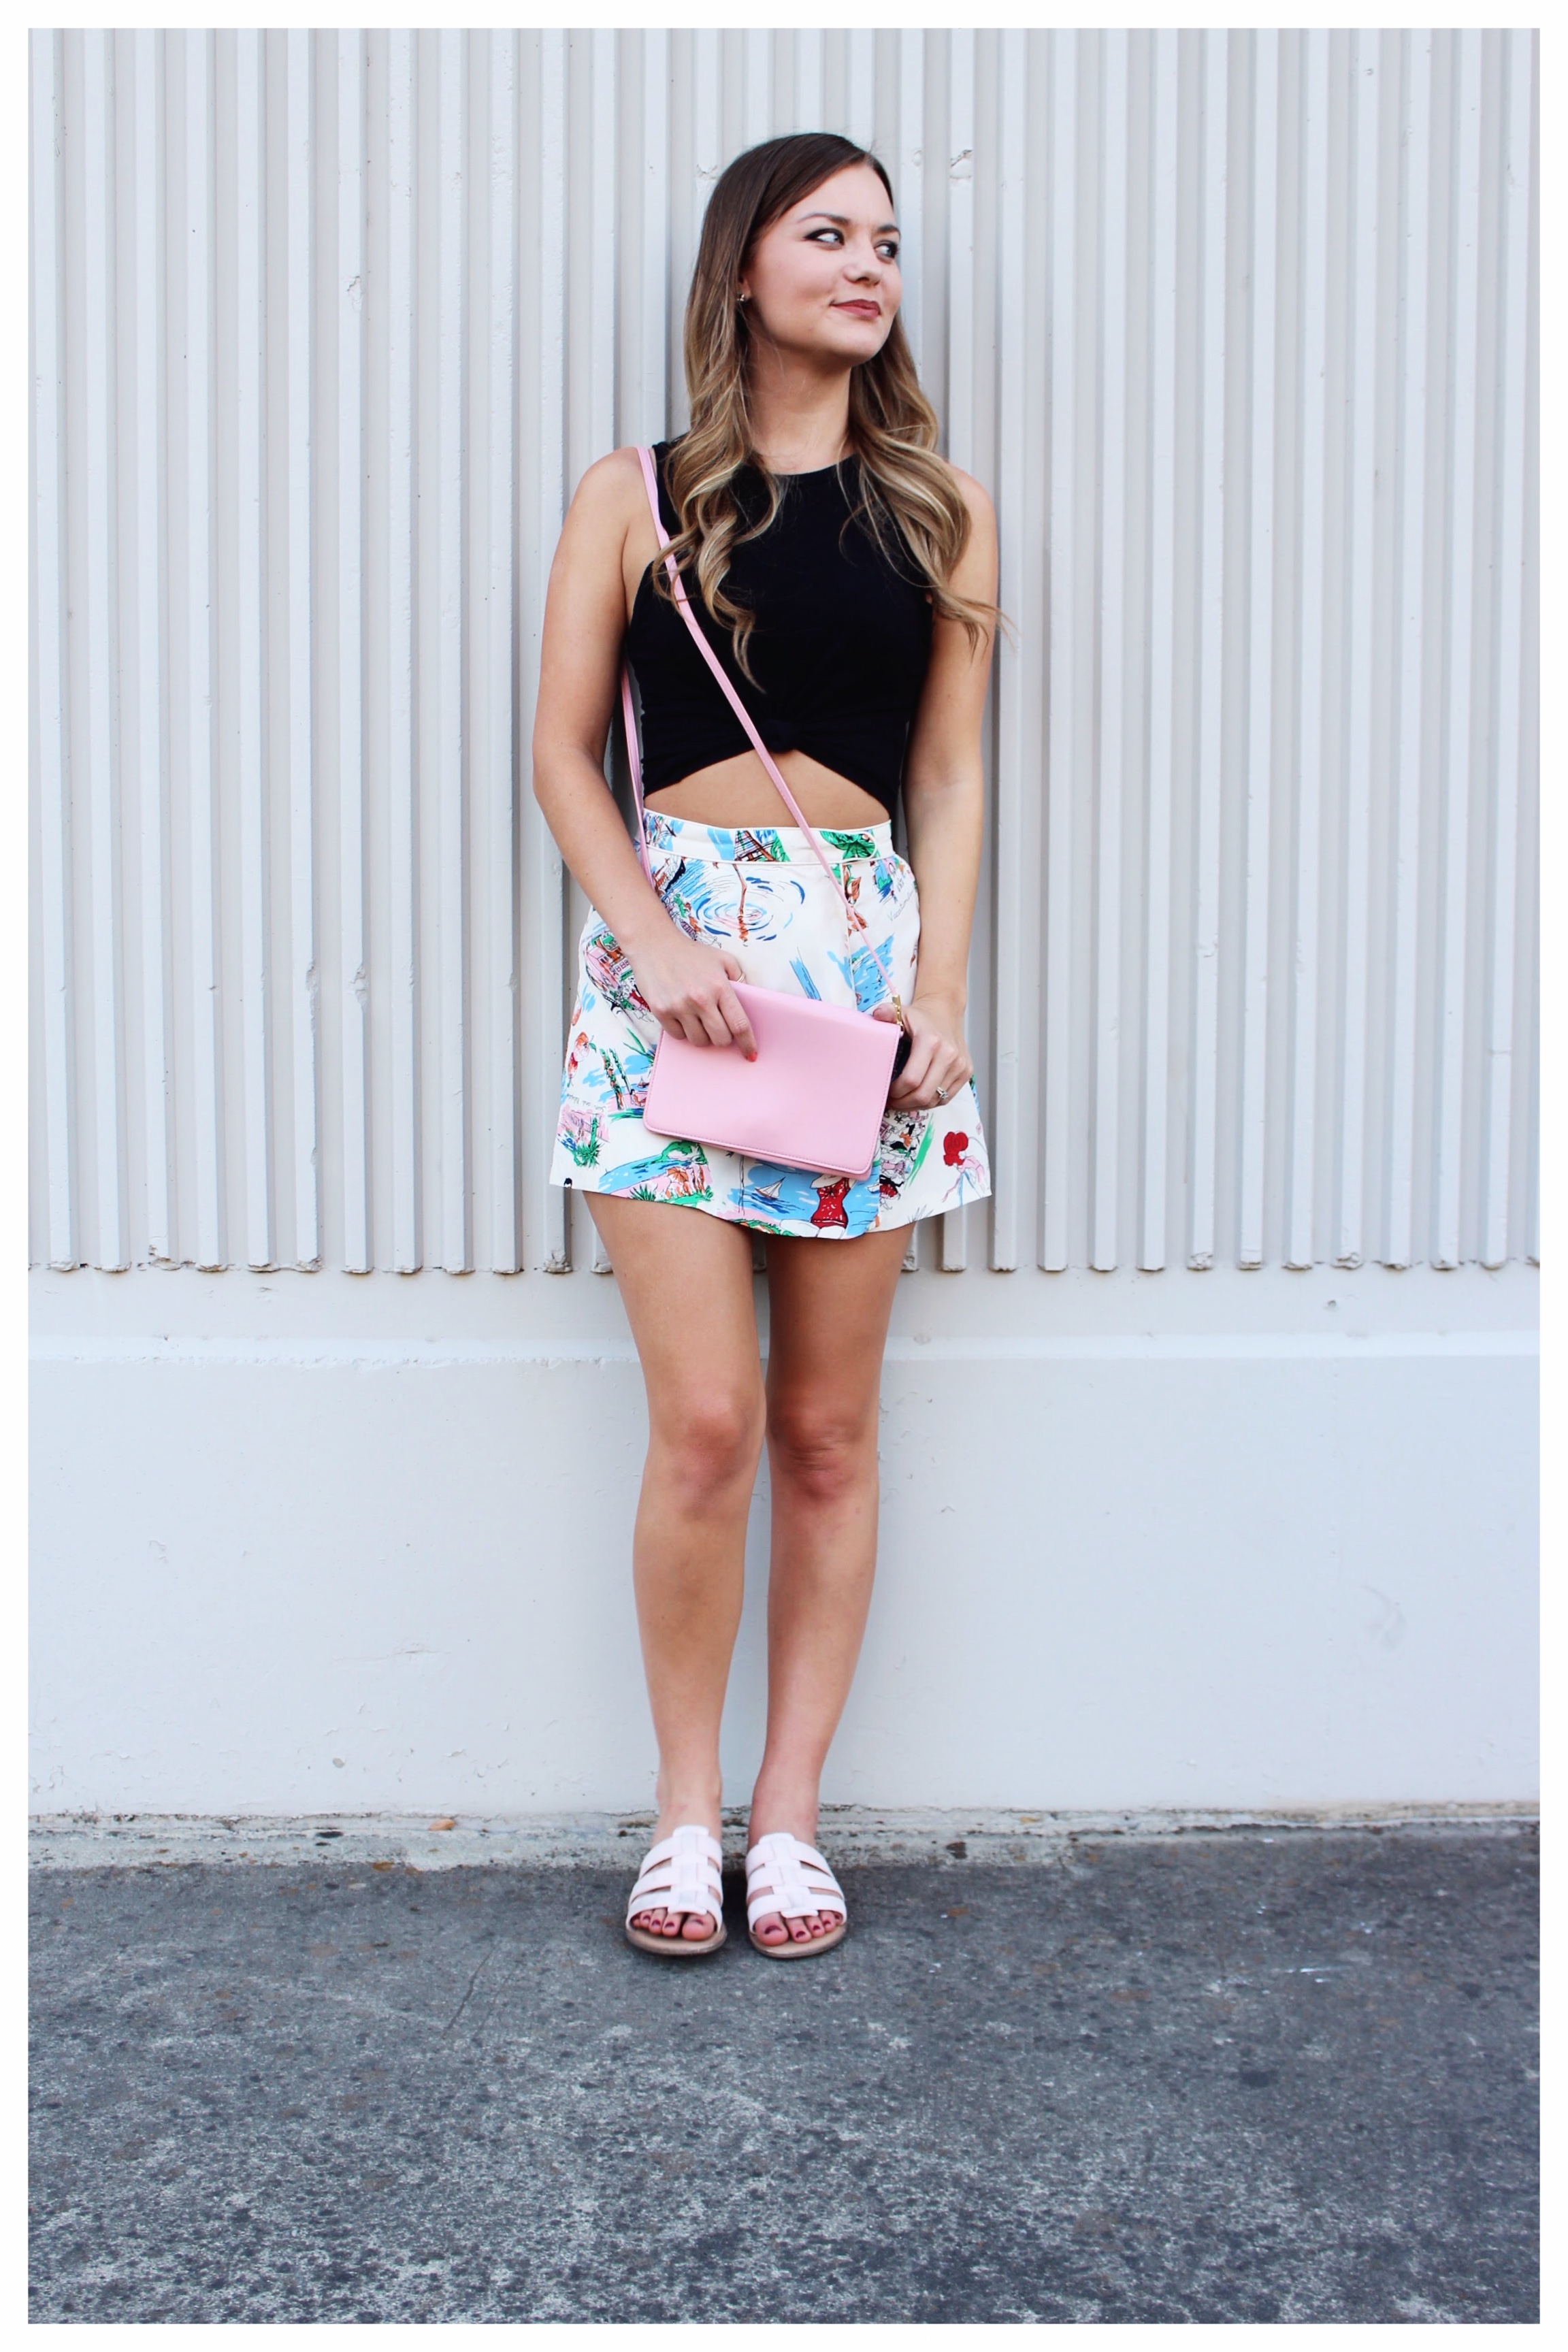 Pink Cross Body Bag and Blush Pink Sandals 